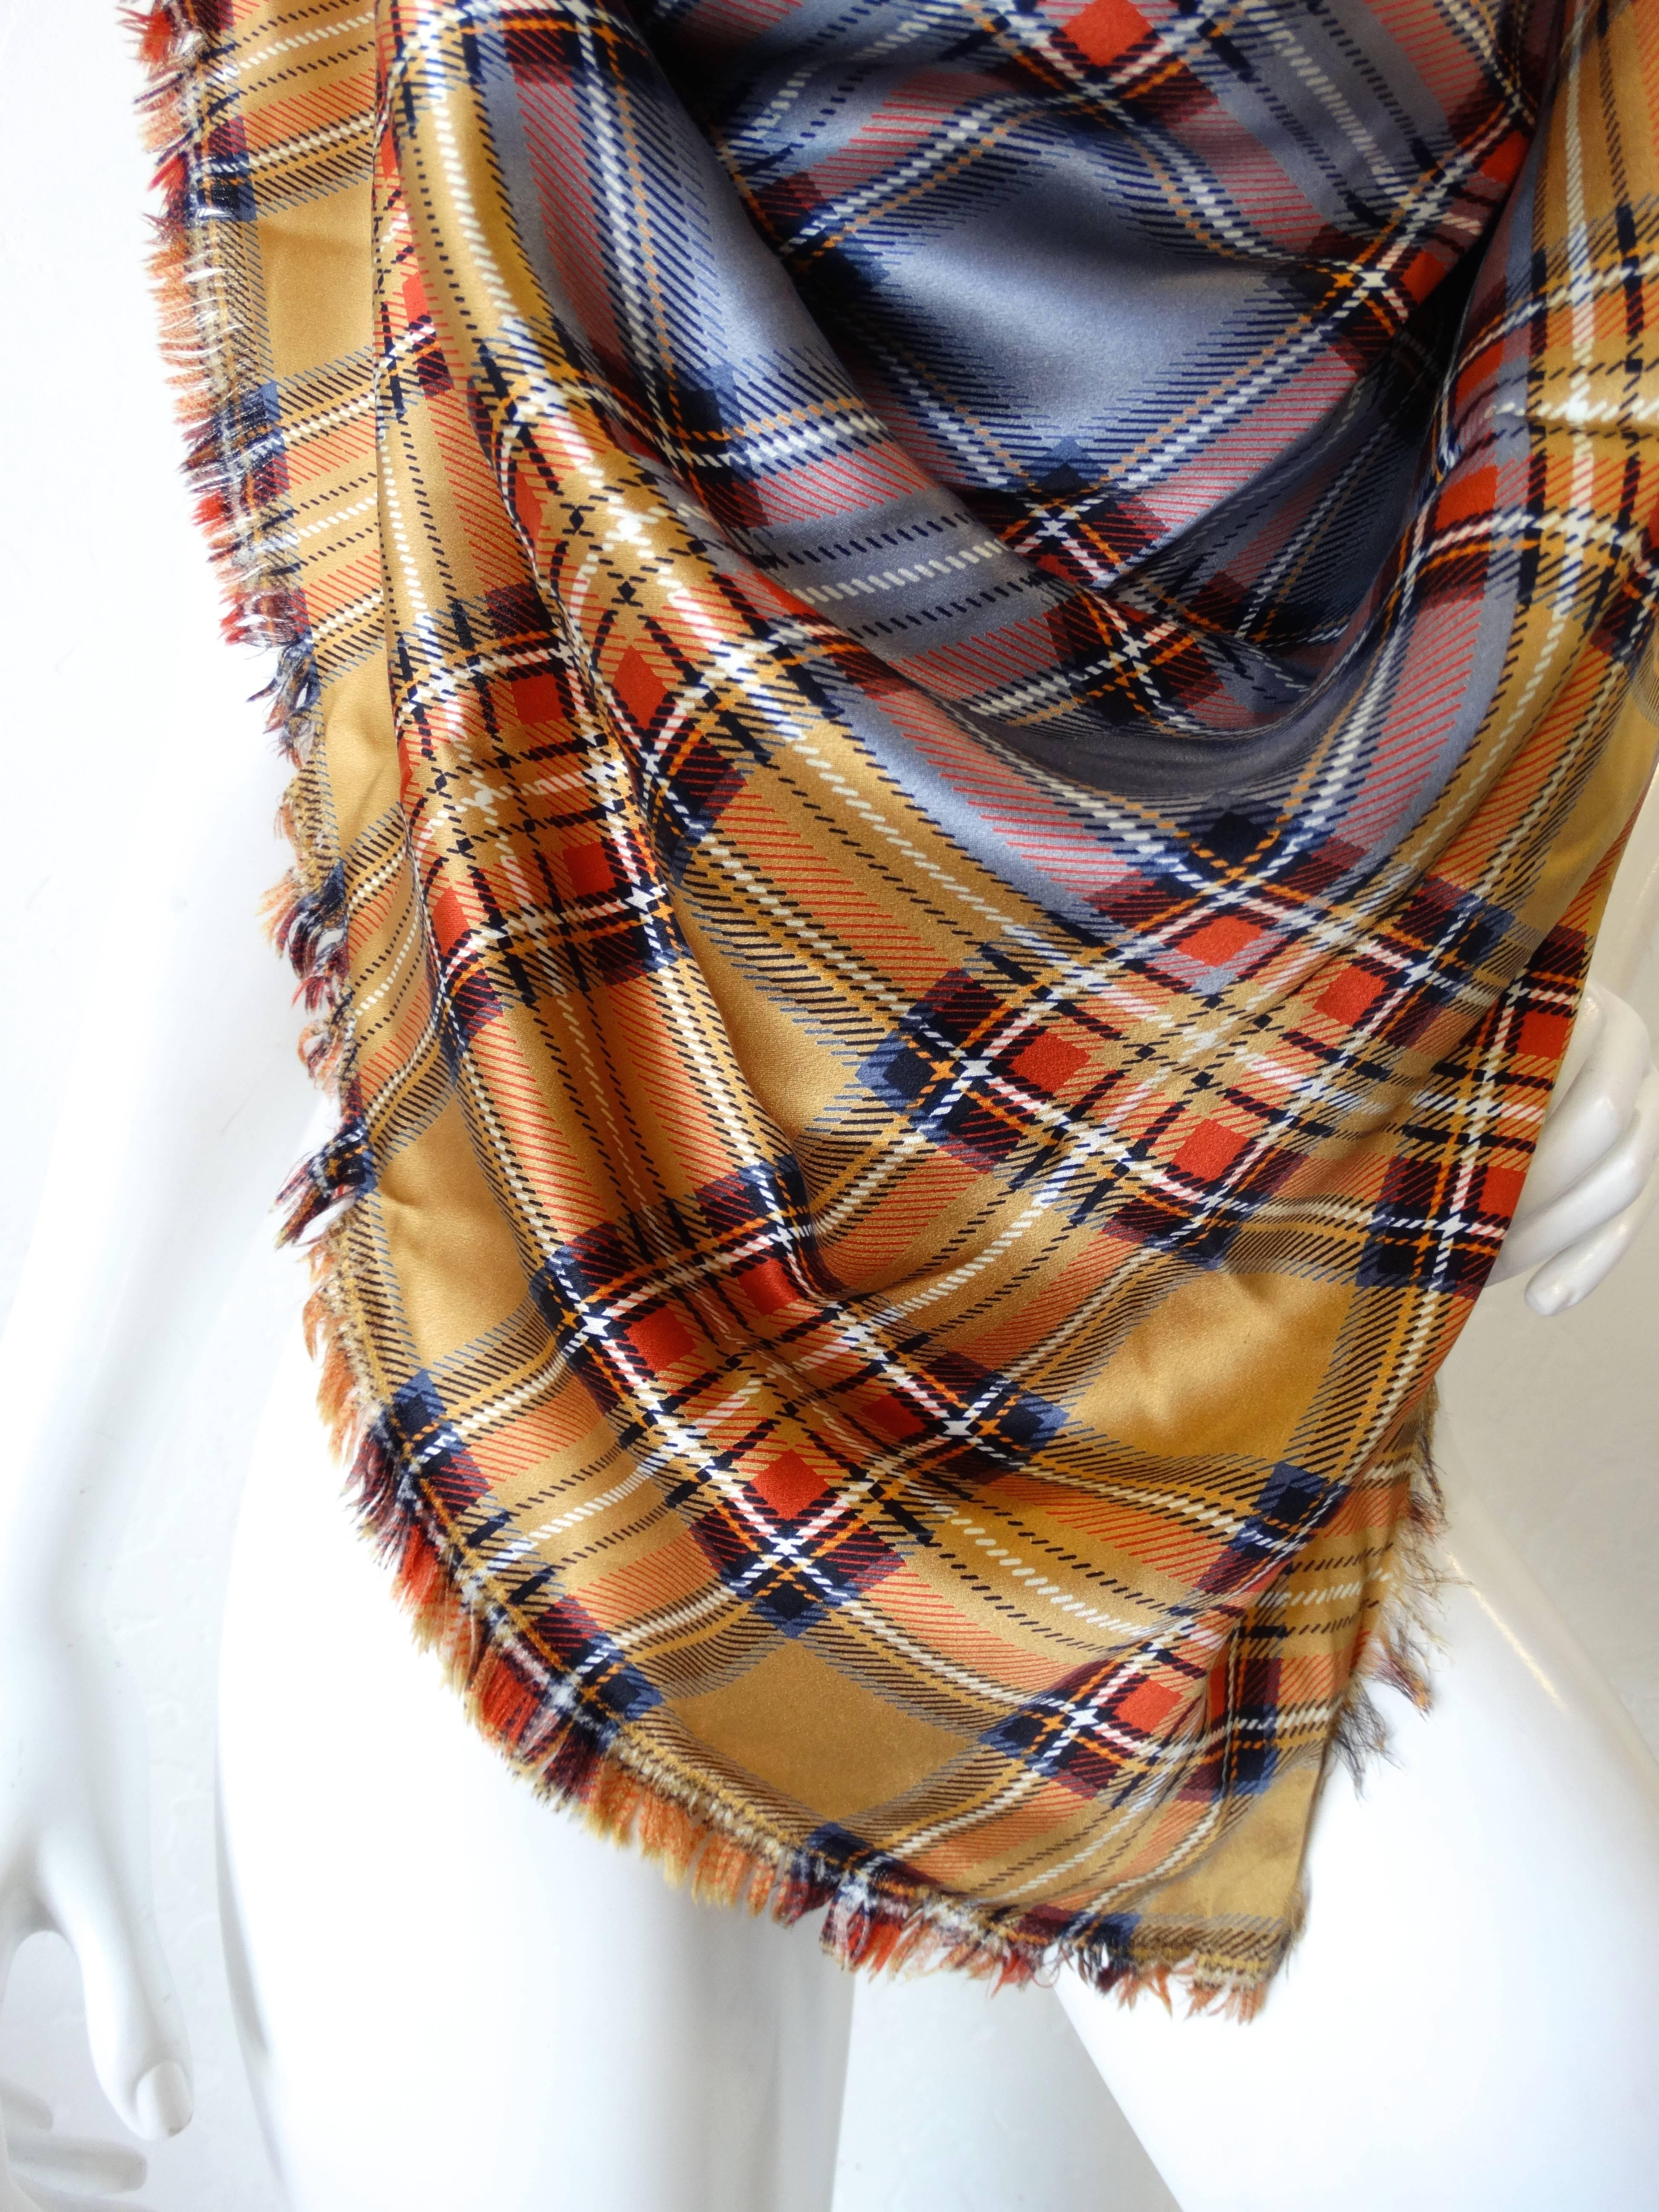 Amazing 1980s Yves Saint Laurent contrasting plaid scarf! Grey tartan plaid contrasted with tan plaid around the edges. Trimmed with frayed fringe all along the perimeter. This scarf is OVERSIZED and can be worn a number of ways. Shown here styled